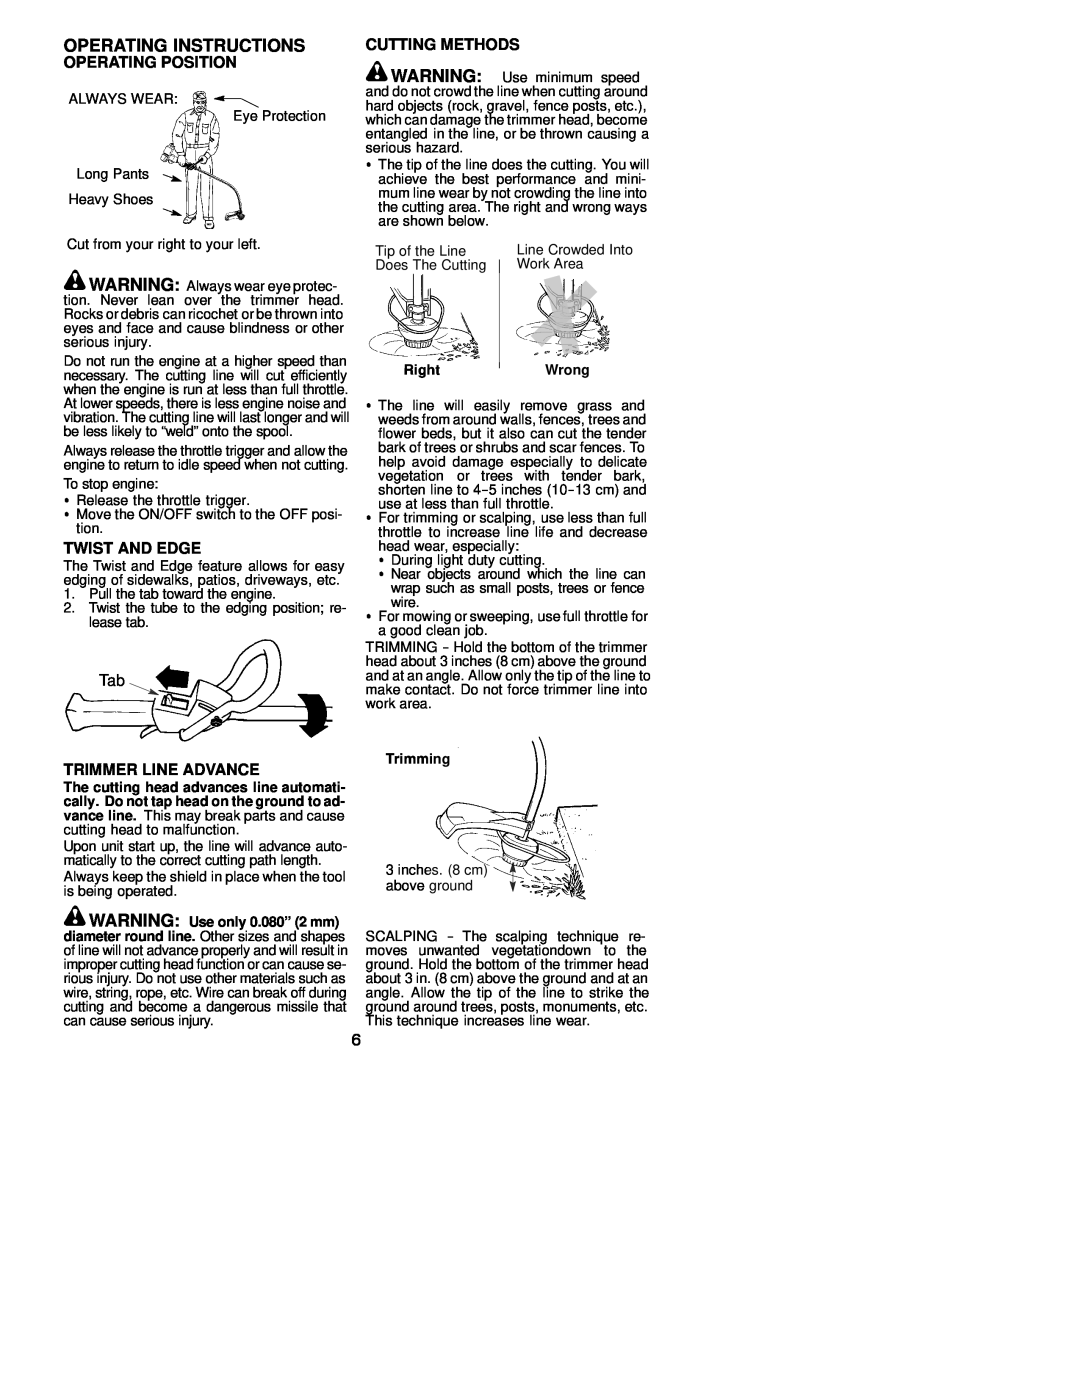 Poulan 530163450 Operating Instructions, Operating Position, Cutting Methods, Twist And Edge, Trimmer Line Advance 